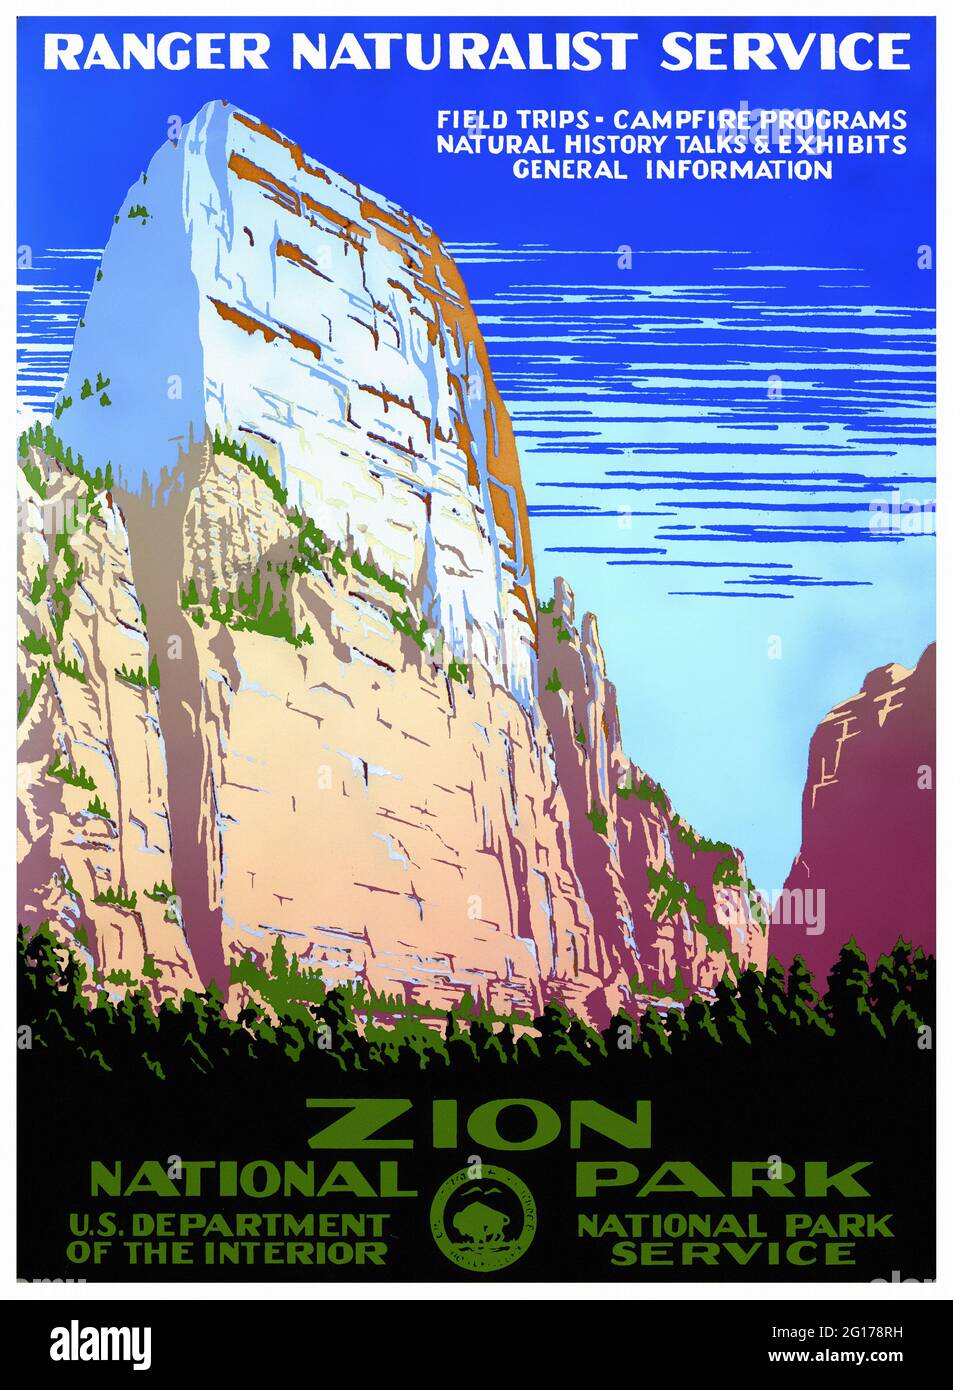 Zion National Park, Ranger Naturalist Service by Chester Don Powell (1896-1964). Restored vintage WPA poster published 1938 in the USA. Stock Photo